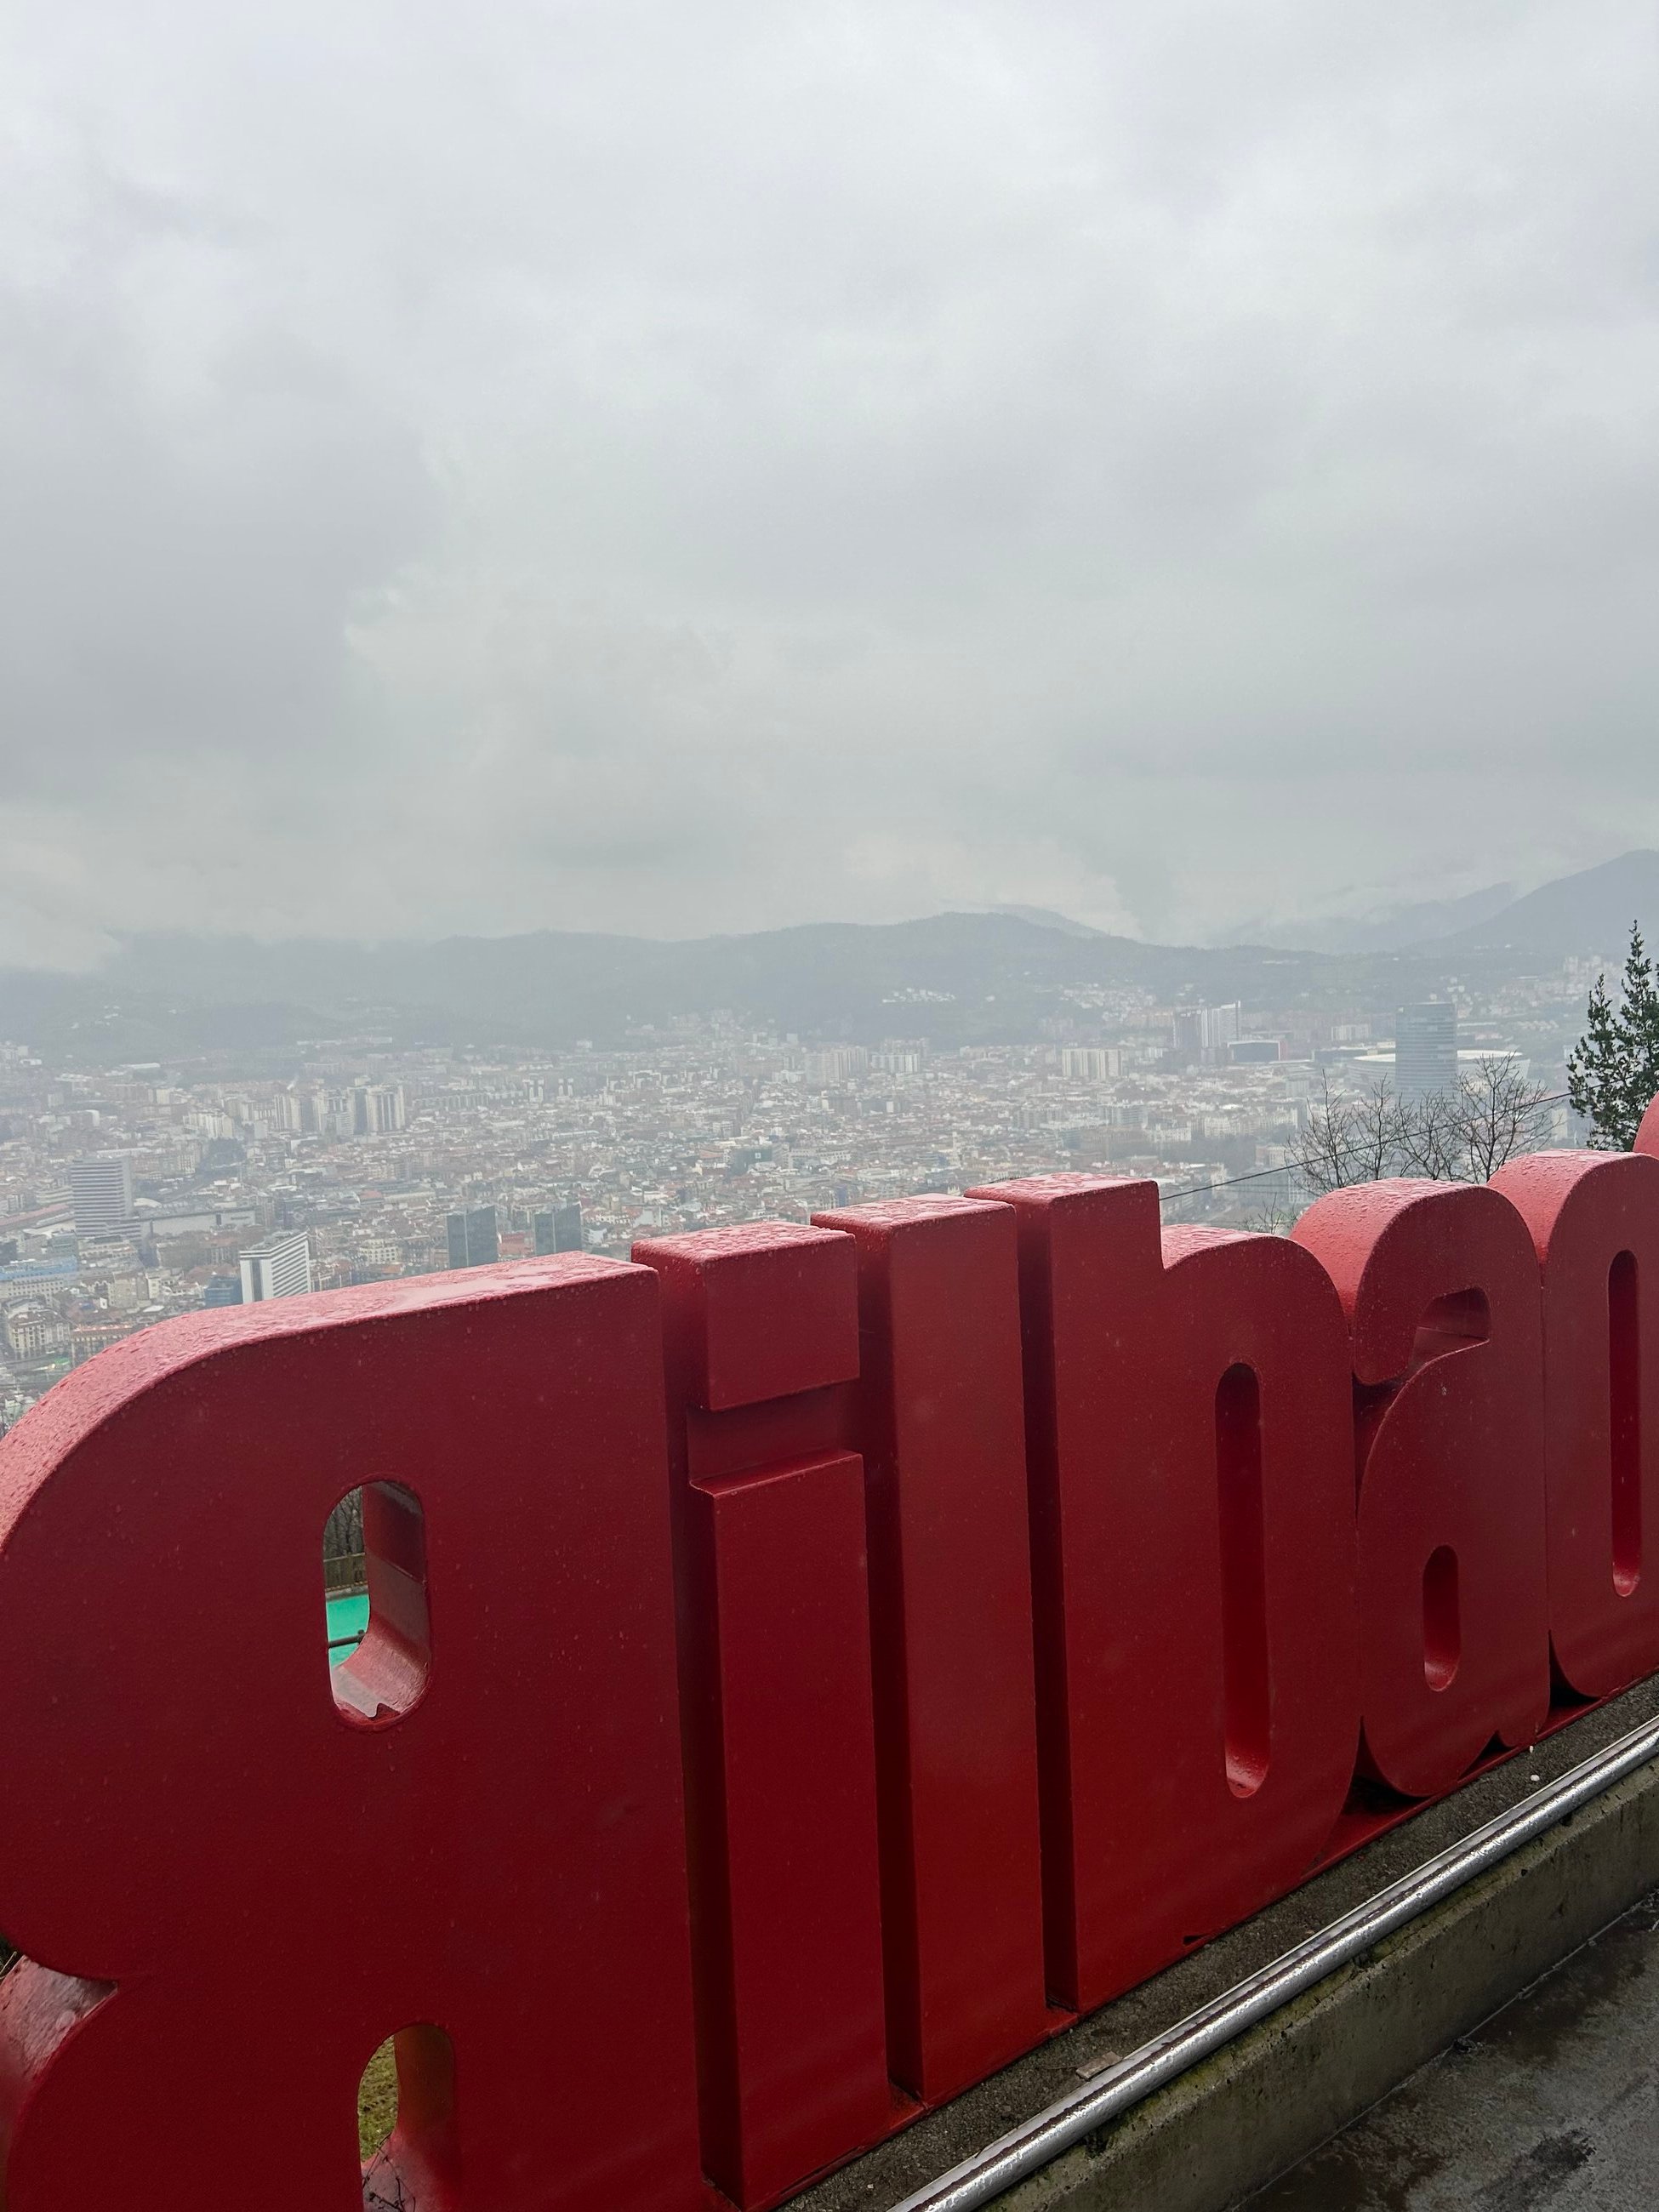 The view at the top of bilbao